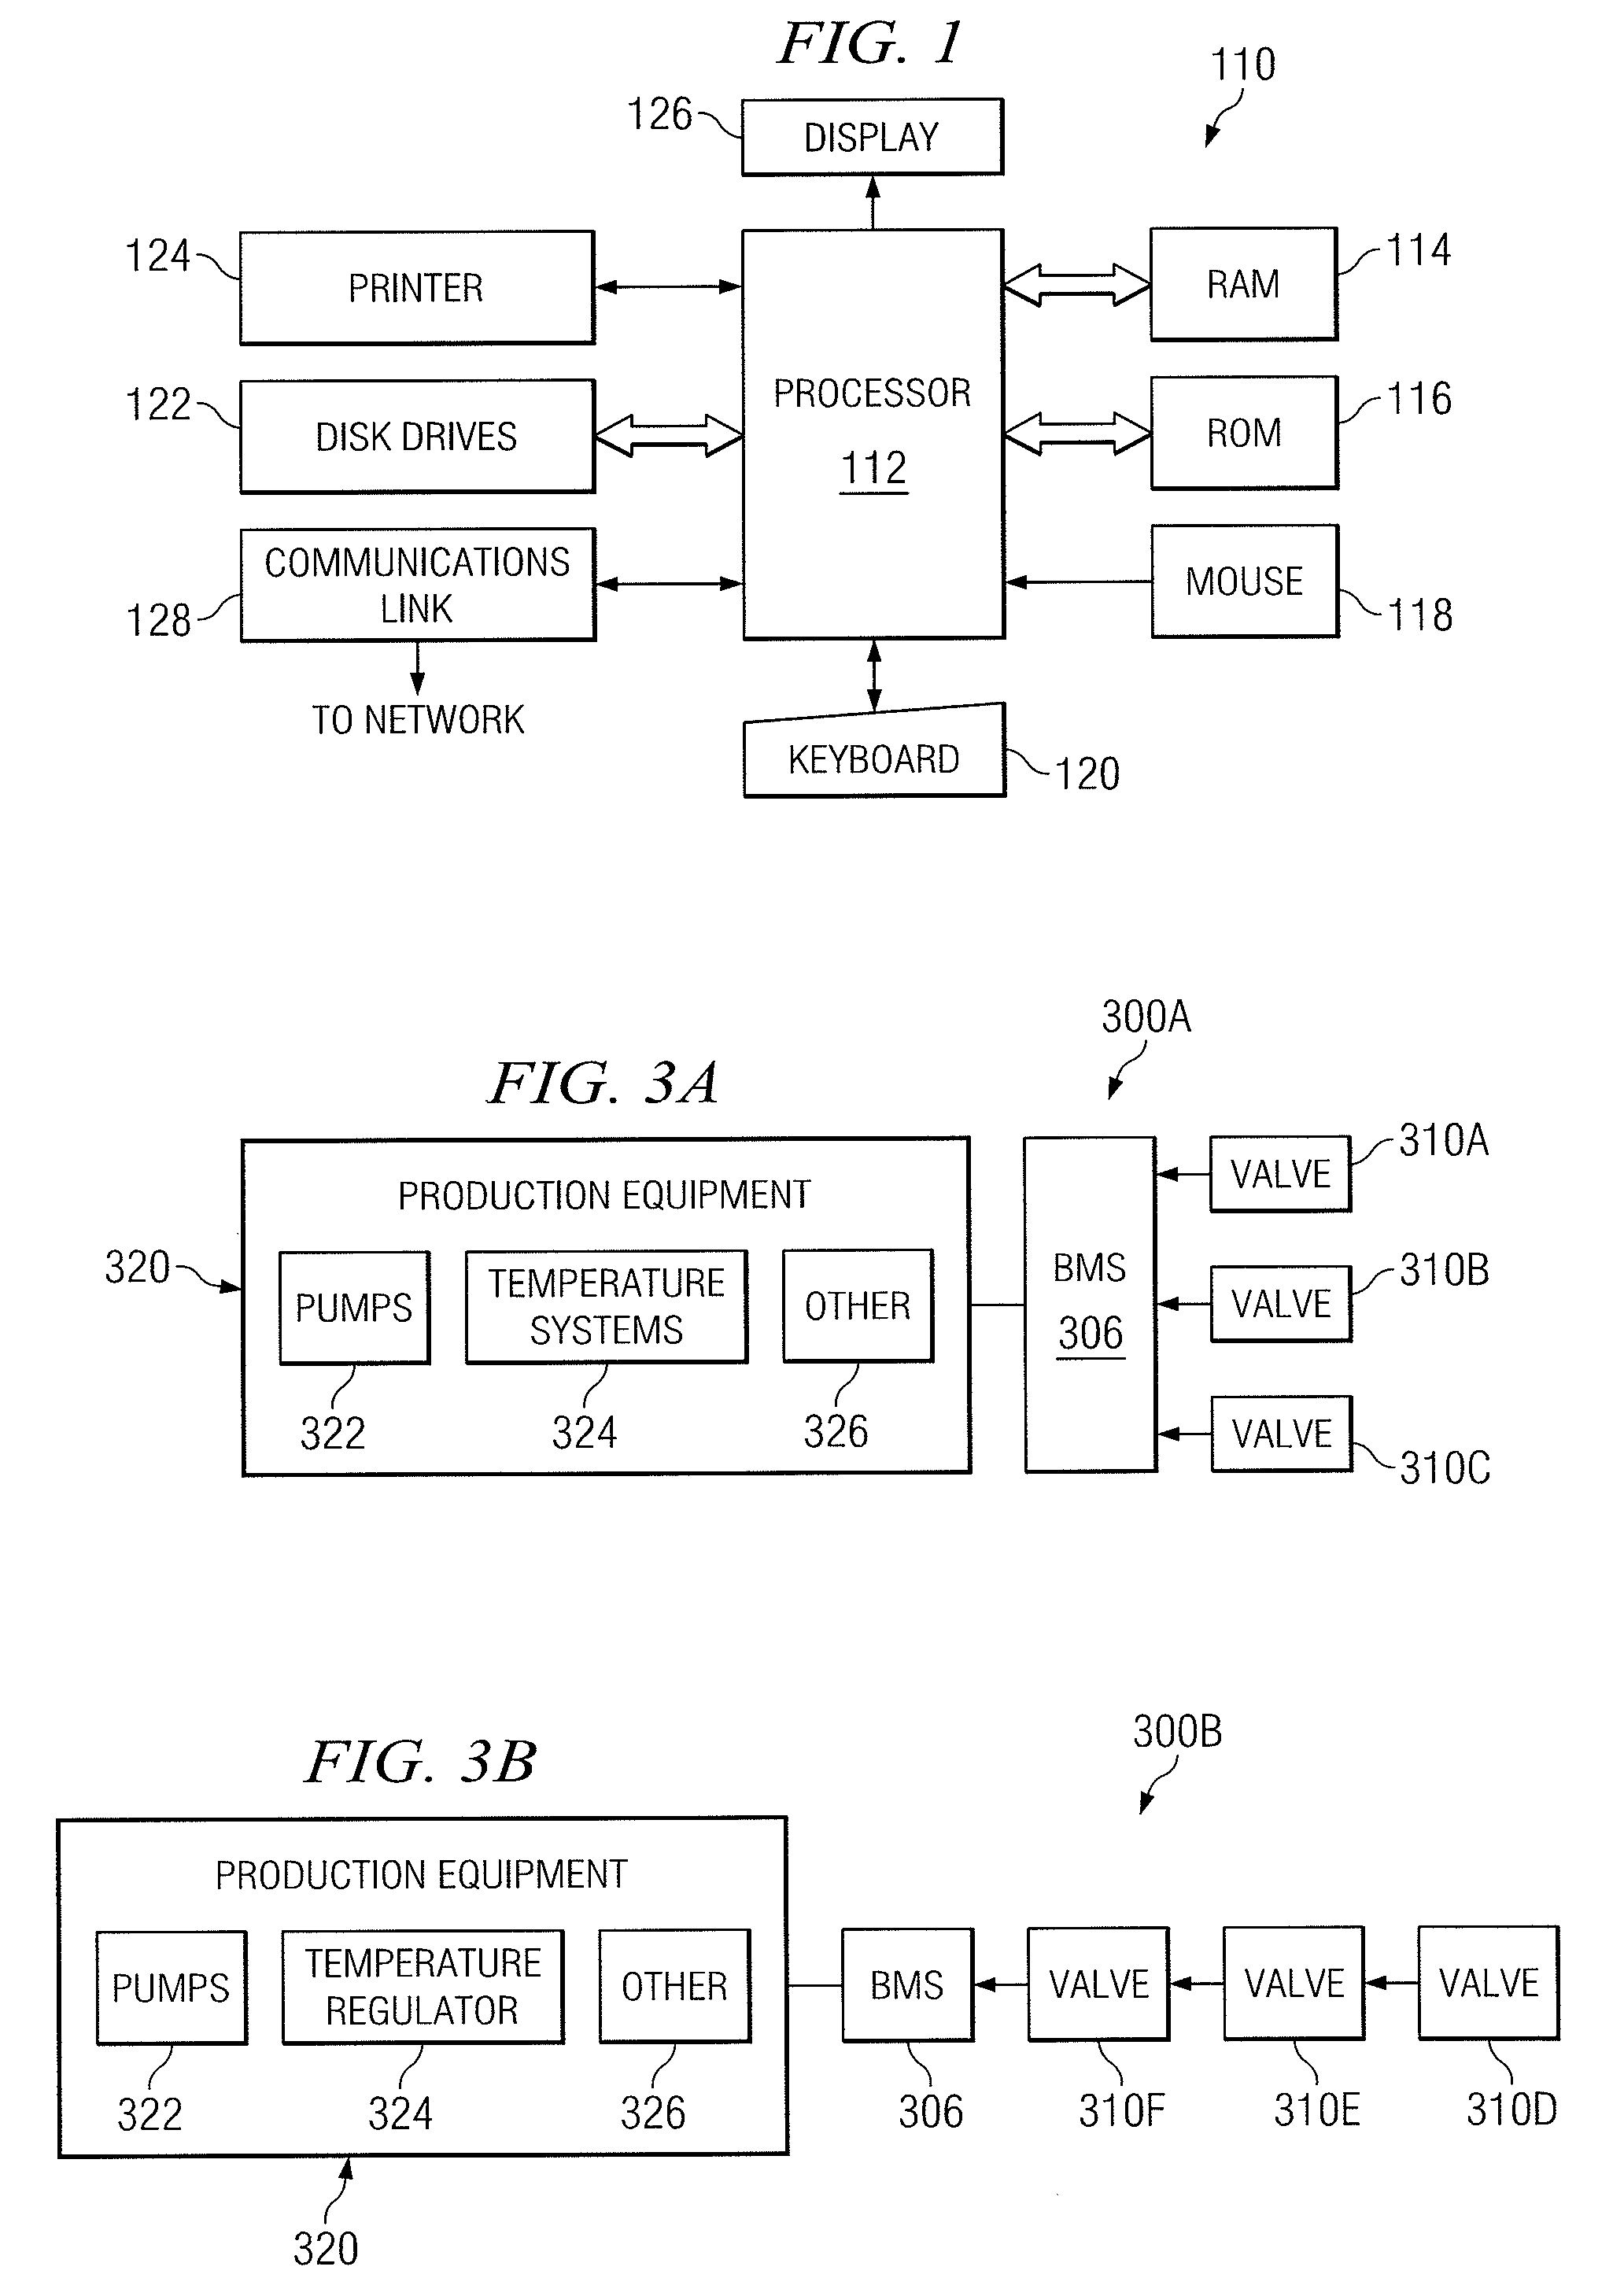 Electronically based control valve with feedback to a building management system (BMS)